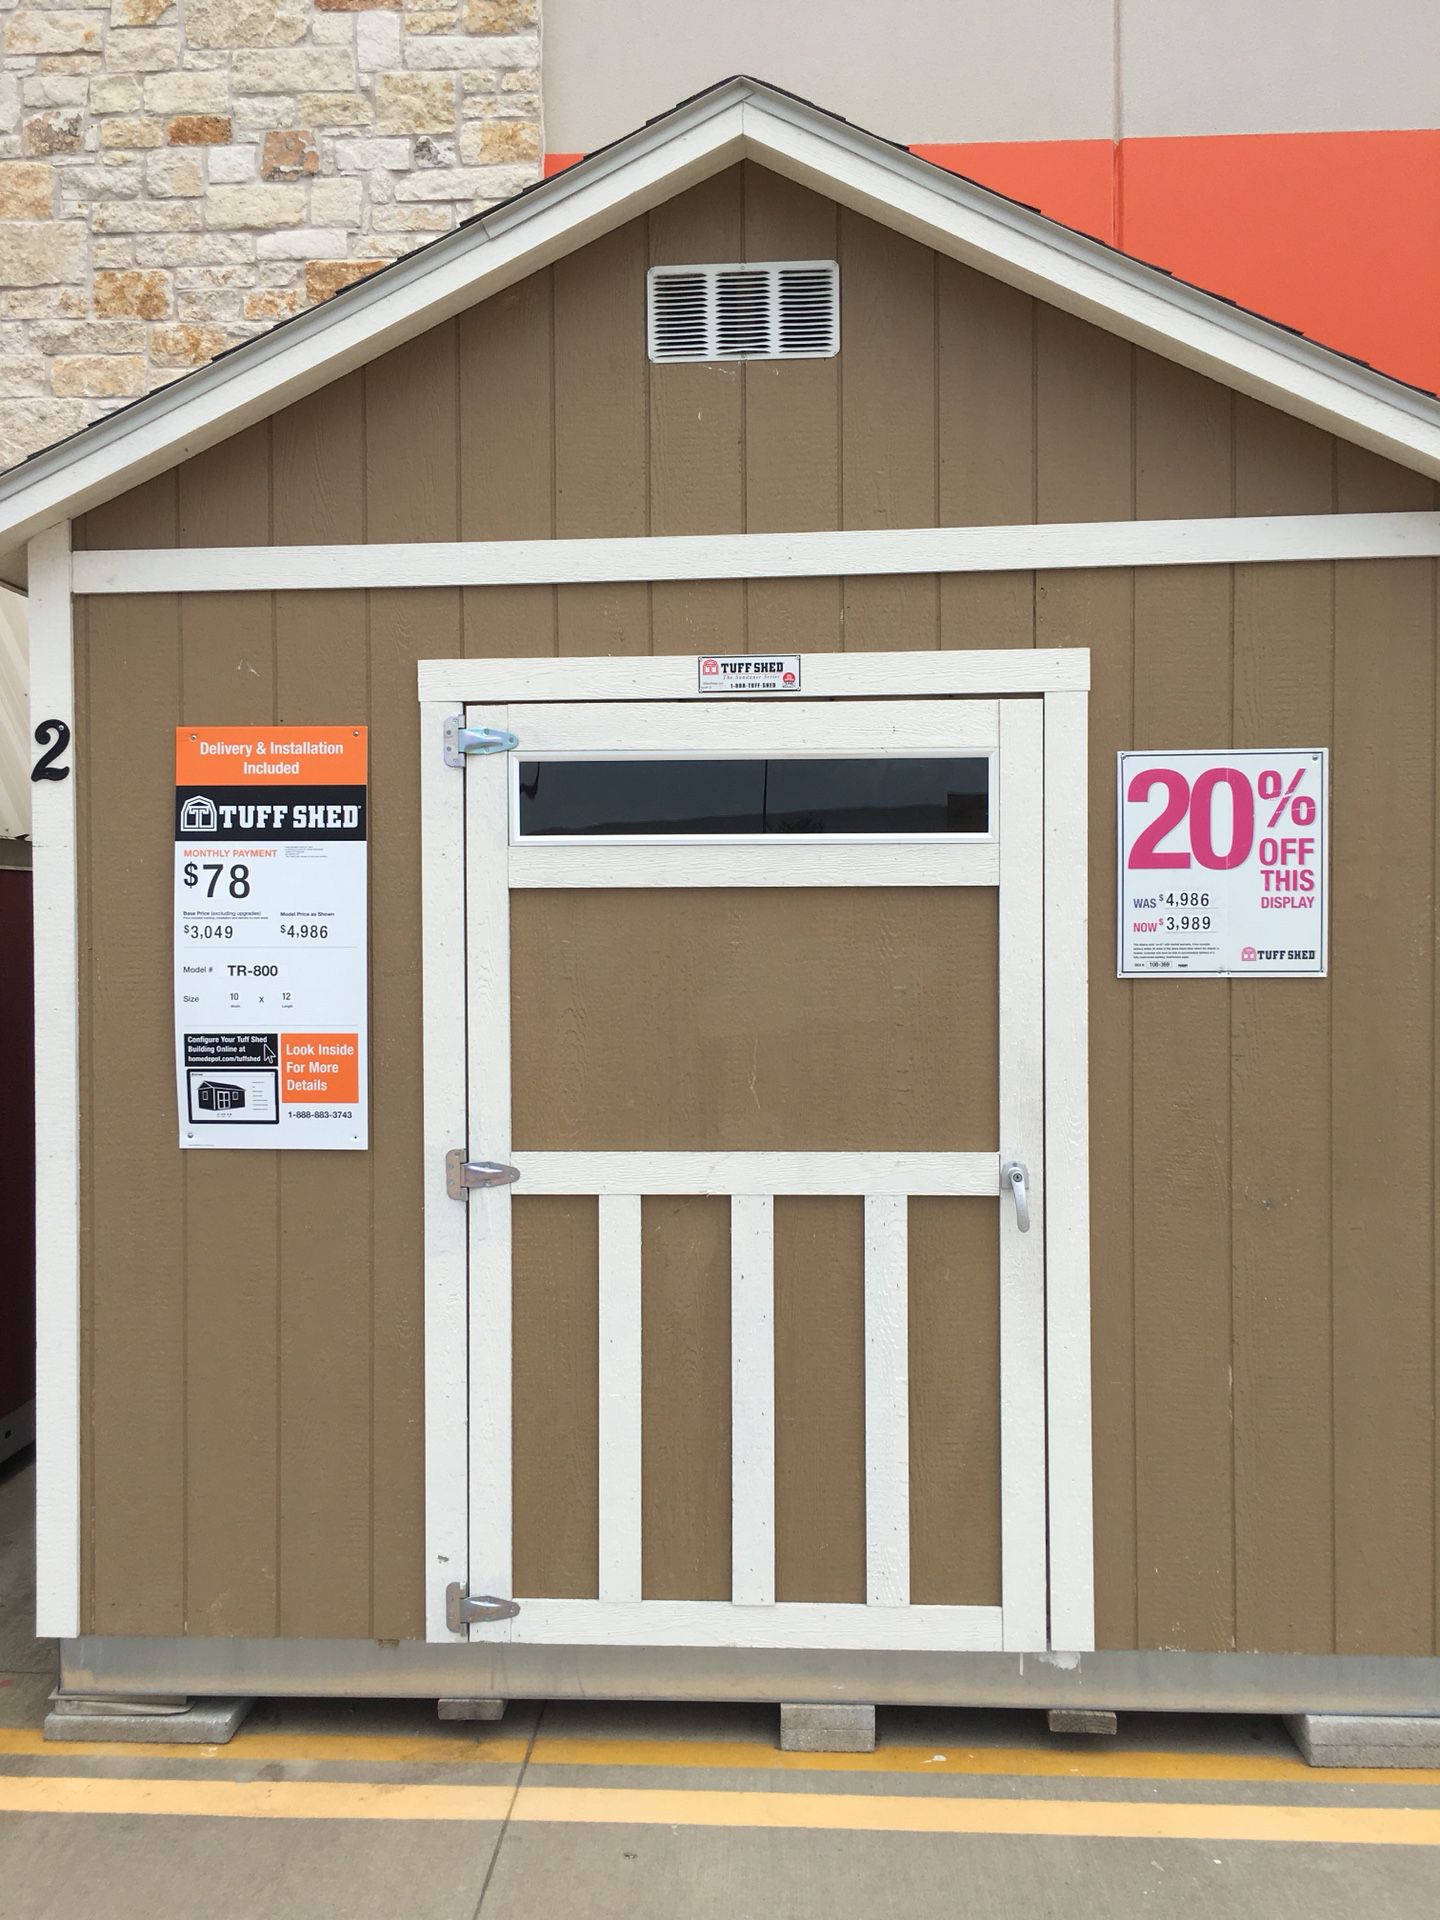 Tuff Shed Temple Tx Home Depot : 8 foot sidewalls: Dimensions 10’x12’: 20% Off: Delivered as is $3989: Loaded with upgrade options: Call Tom Gilbert,